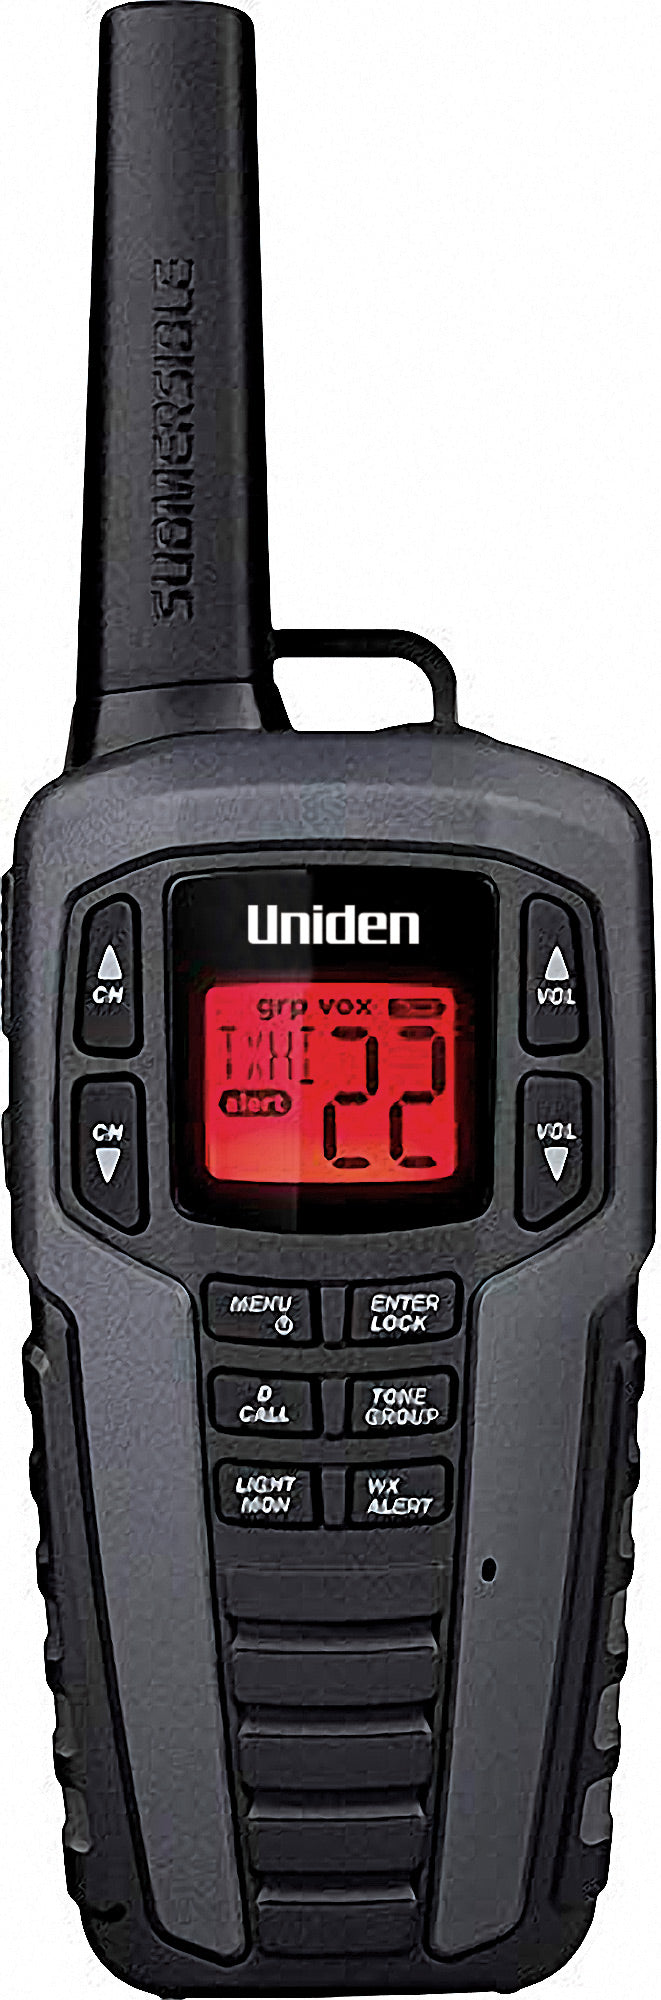 Waterproof Two-Way Radios with USB Chargers SX507-2CKHS — Uniden America  Corporation